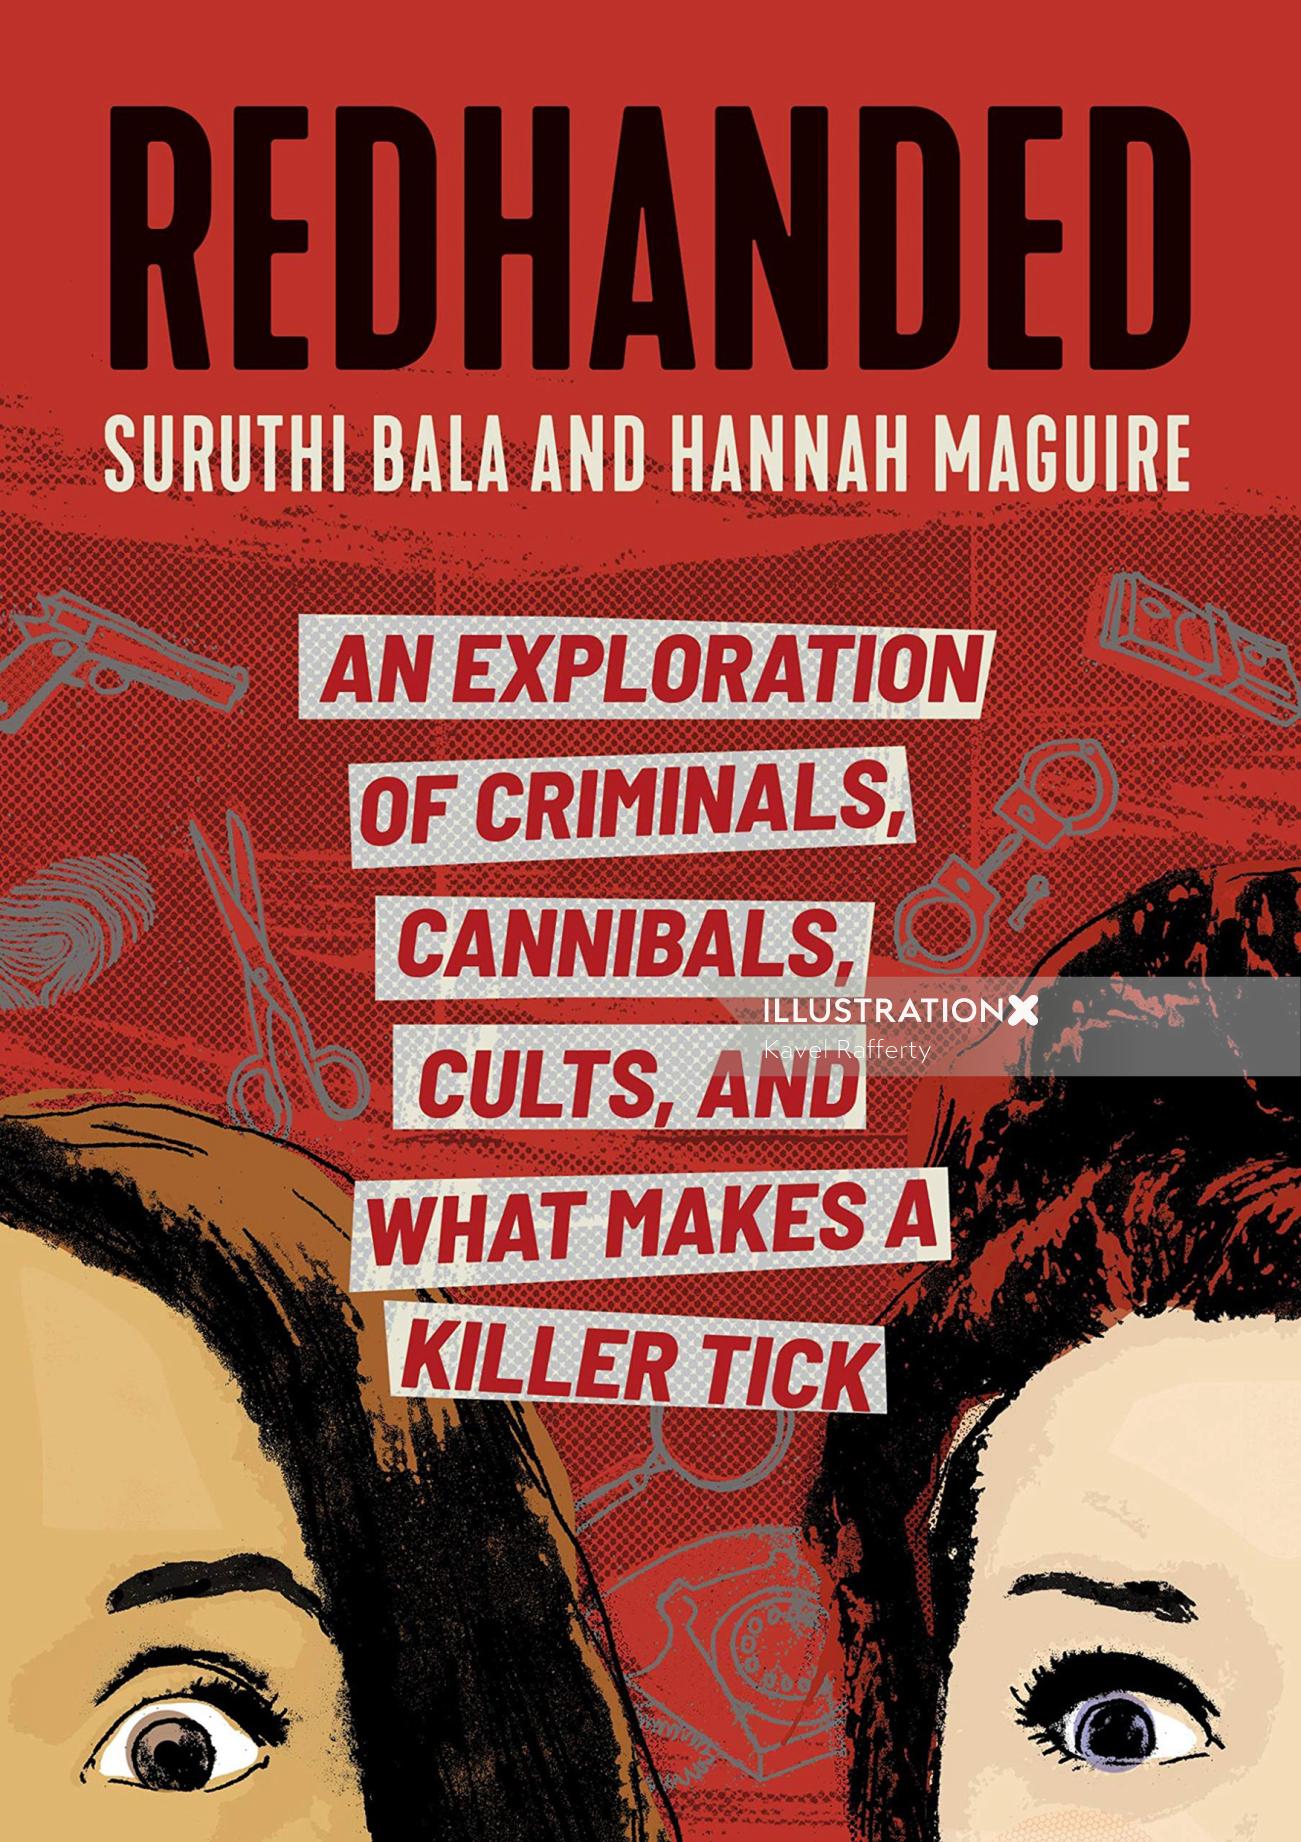 Red Handed book cover design